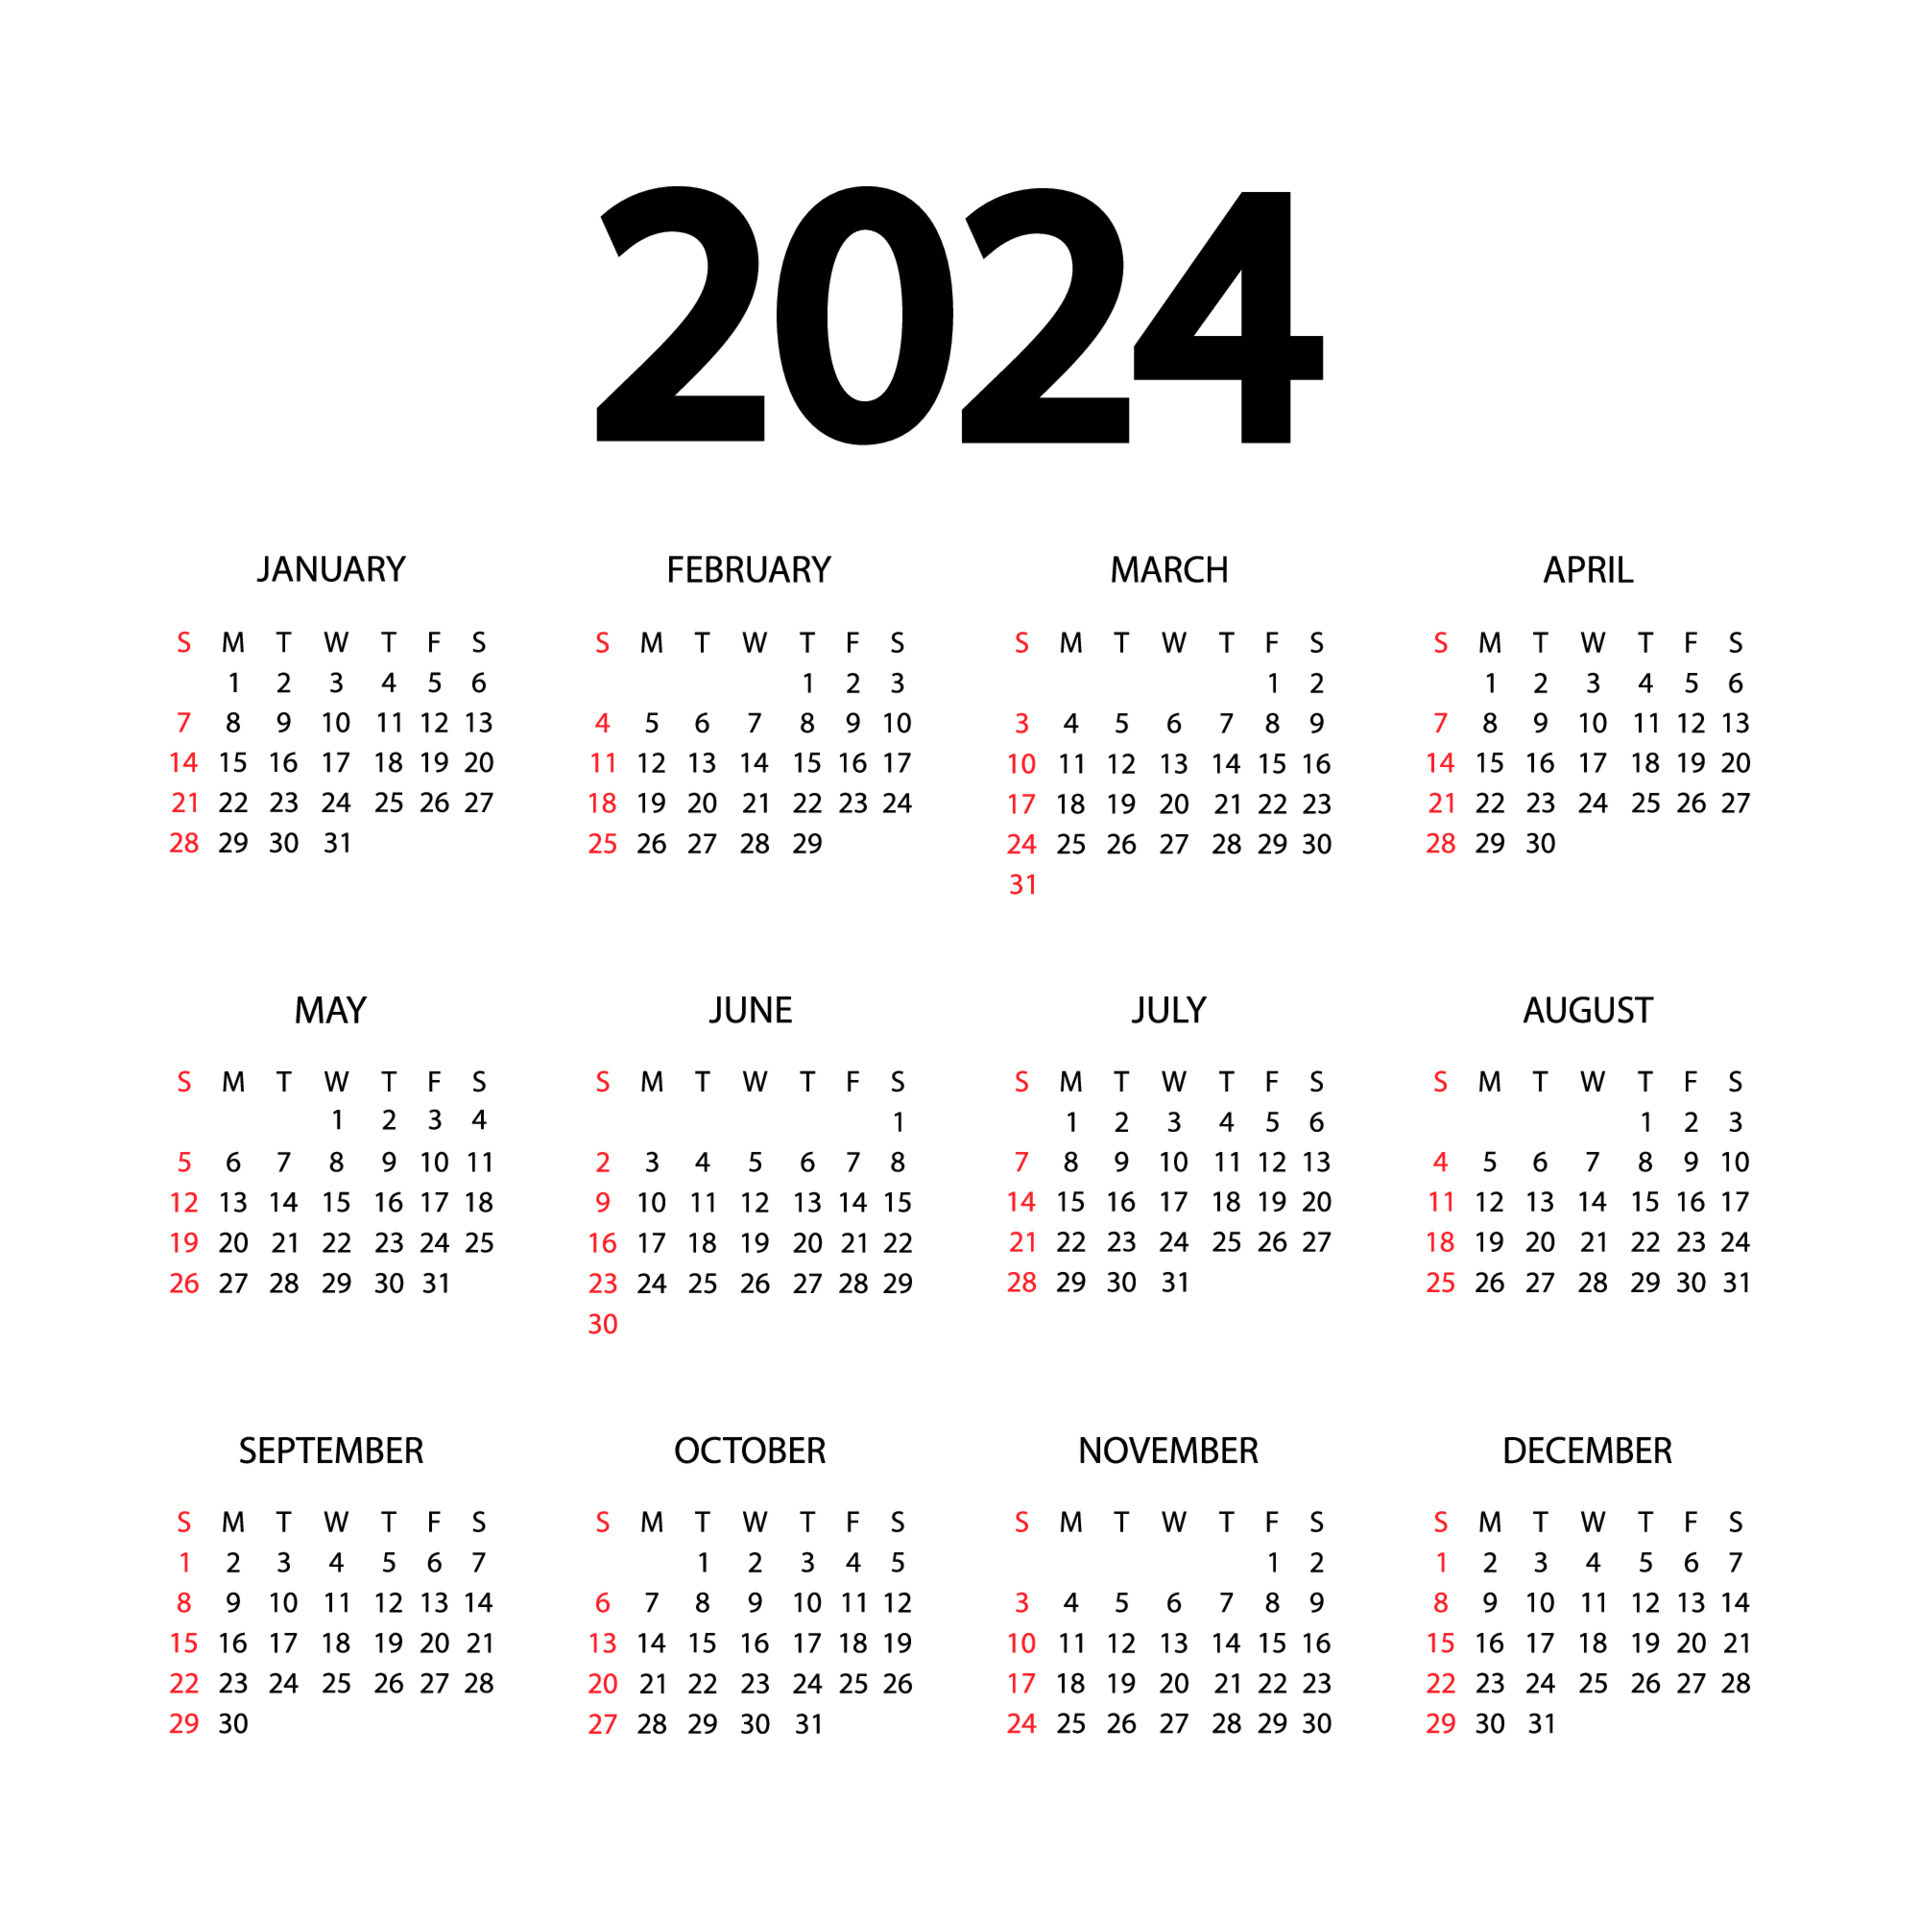 Calendar Template For 2024 Year. Planner Diary In A Minimalist | Template For Calendar 2024